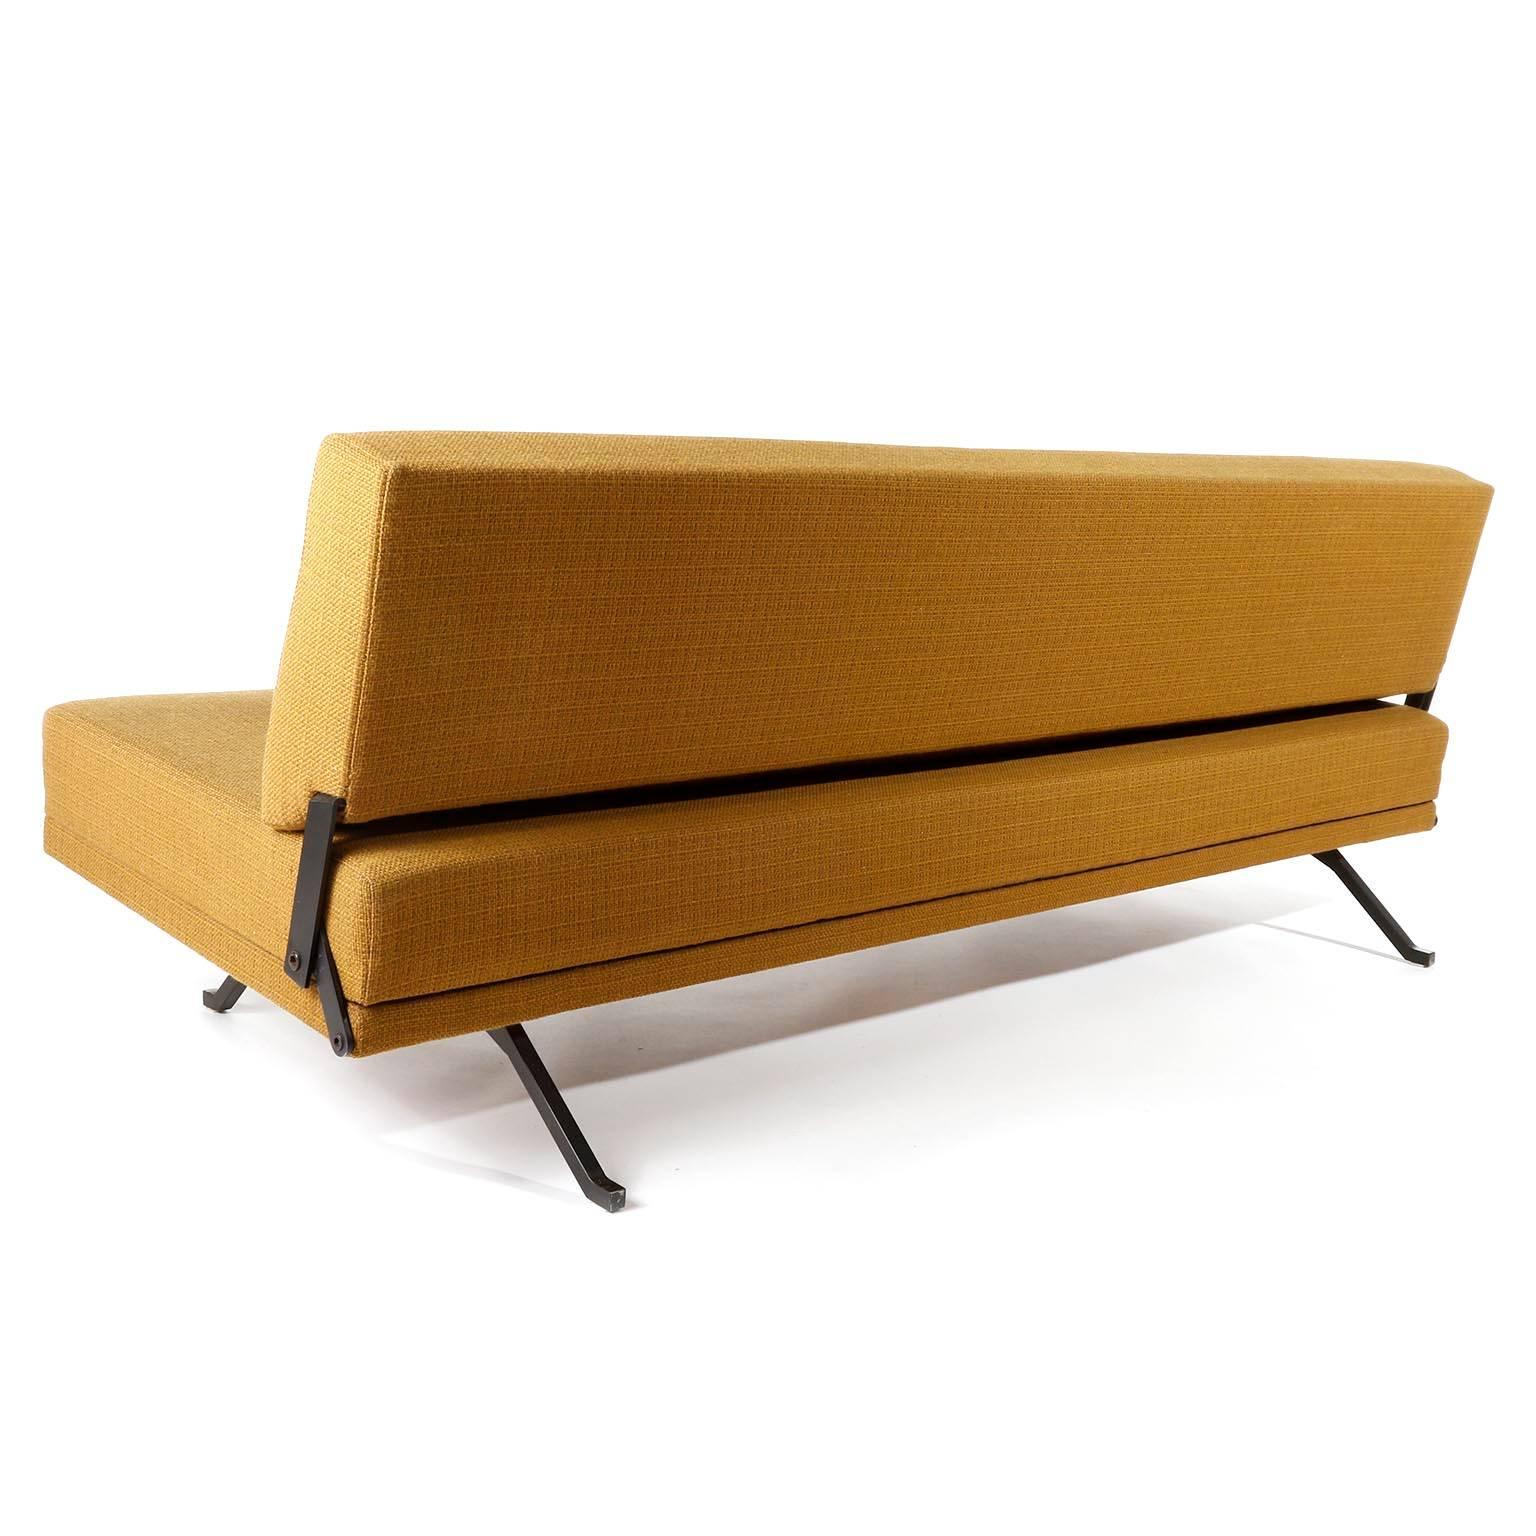 Metal Johannes Spalt 'Constanze' Convertible Daybed Sofa by Wittmann, Austria, 1970 For Sale